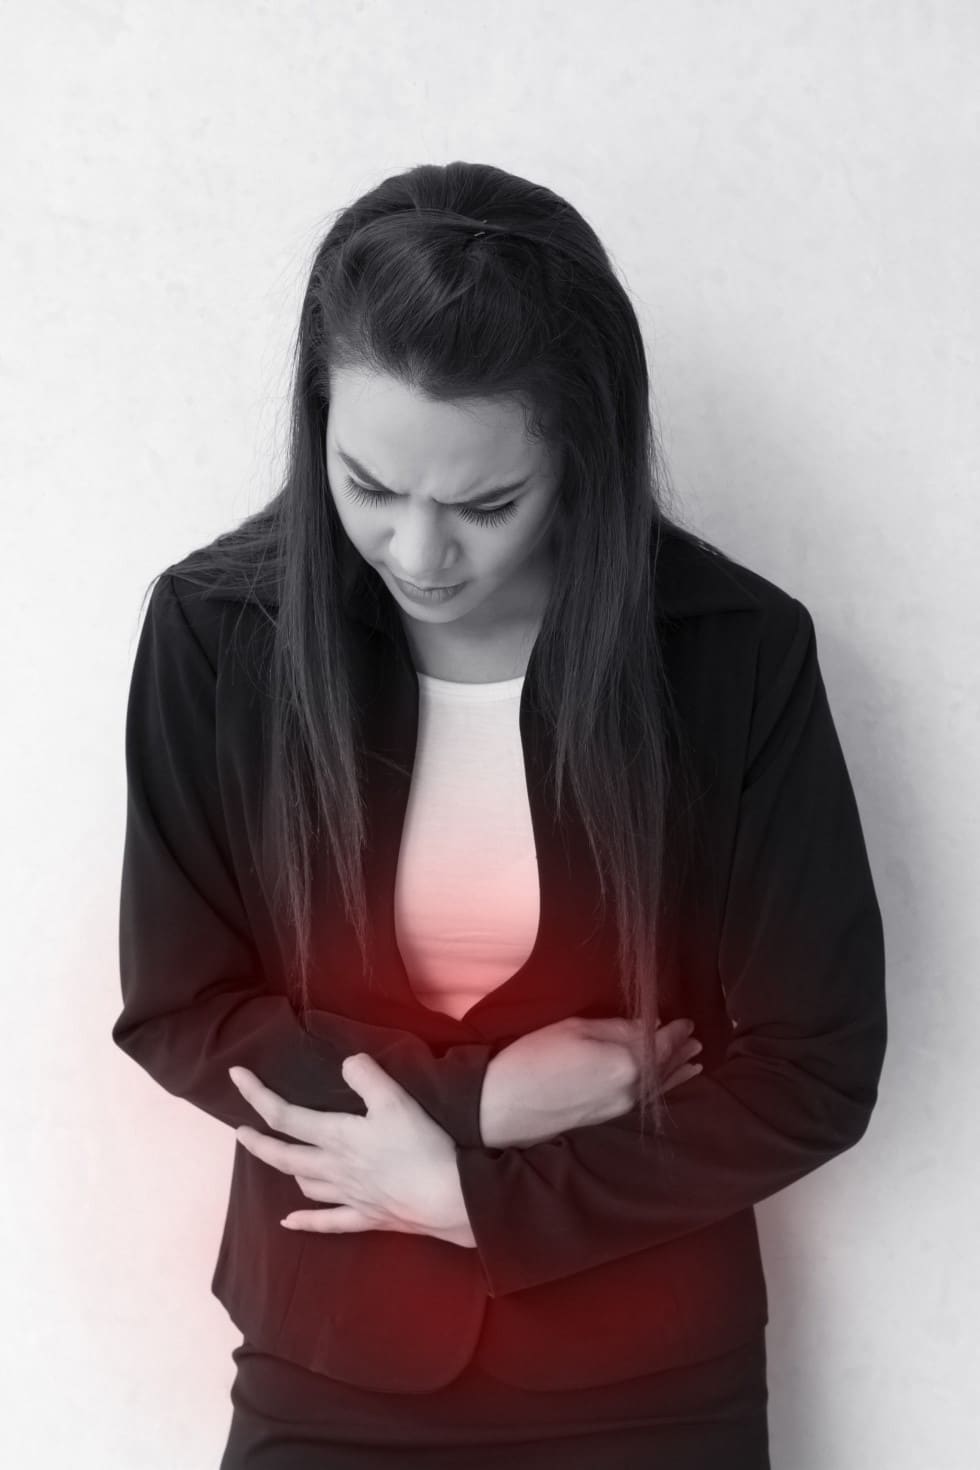 Menstrual cramps - Red Light Therapy News